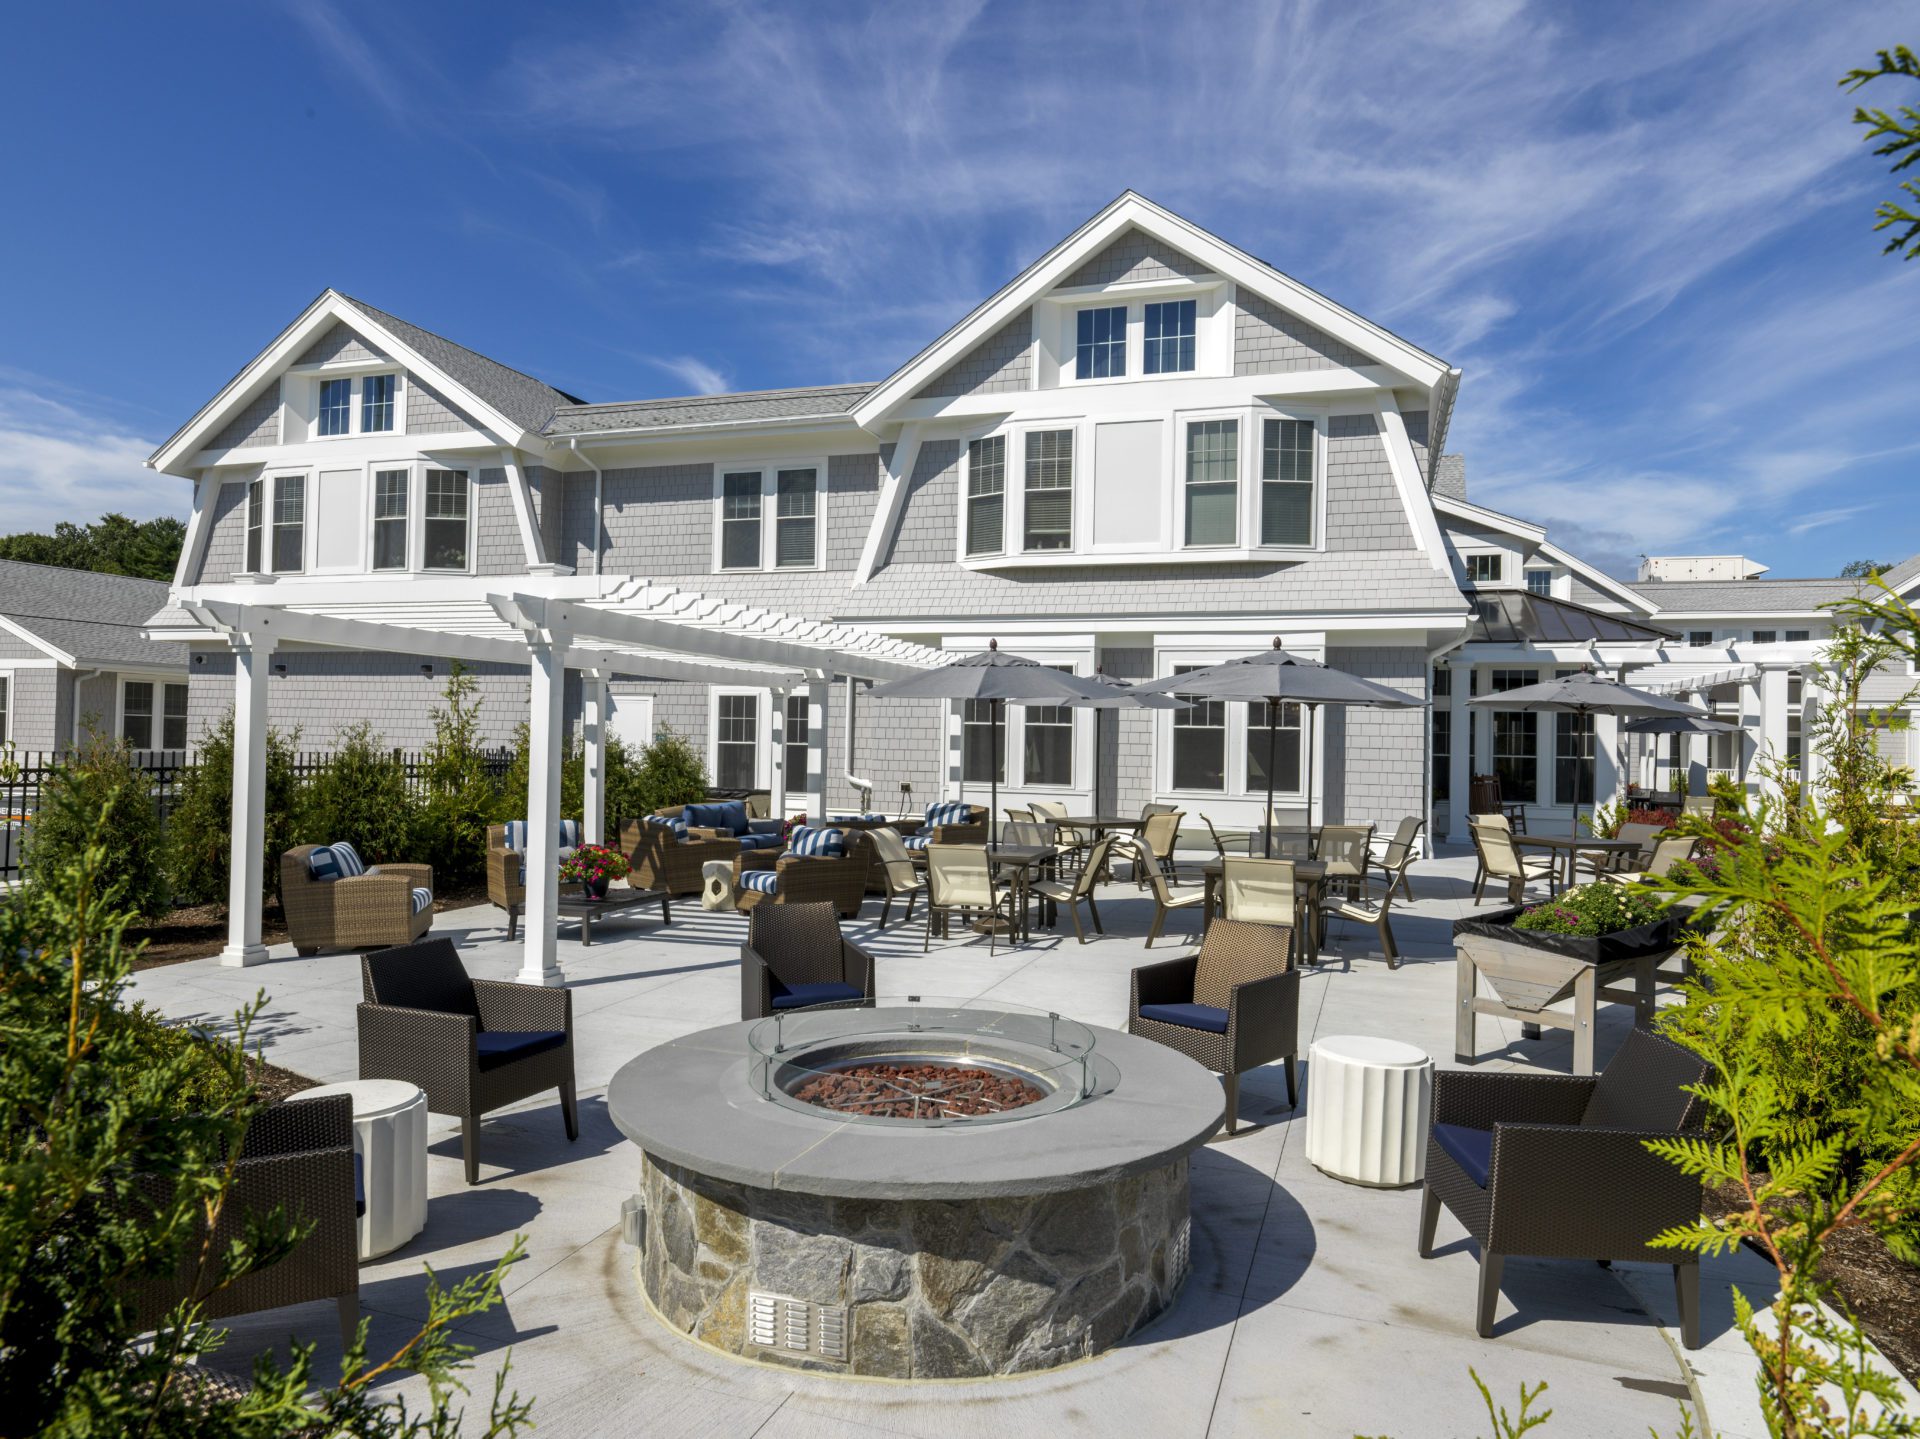 Penniman Hill Senior Living, Hingham, MA by Callahan Construction and The Architectural Team